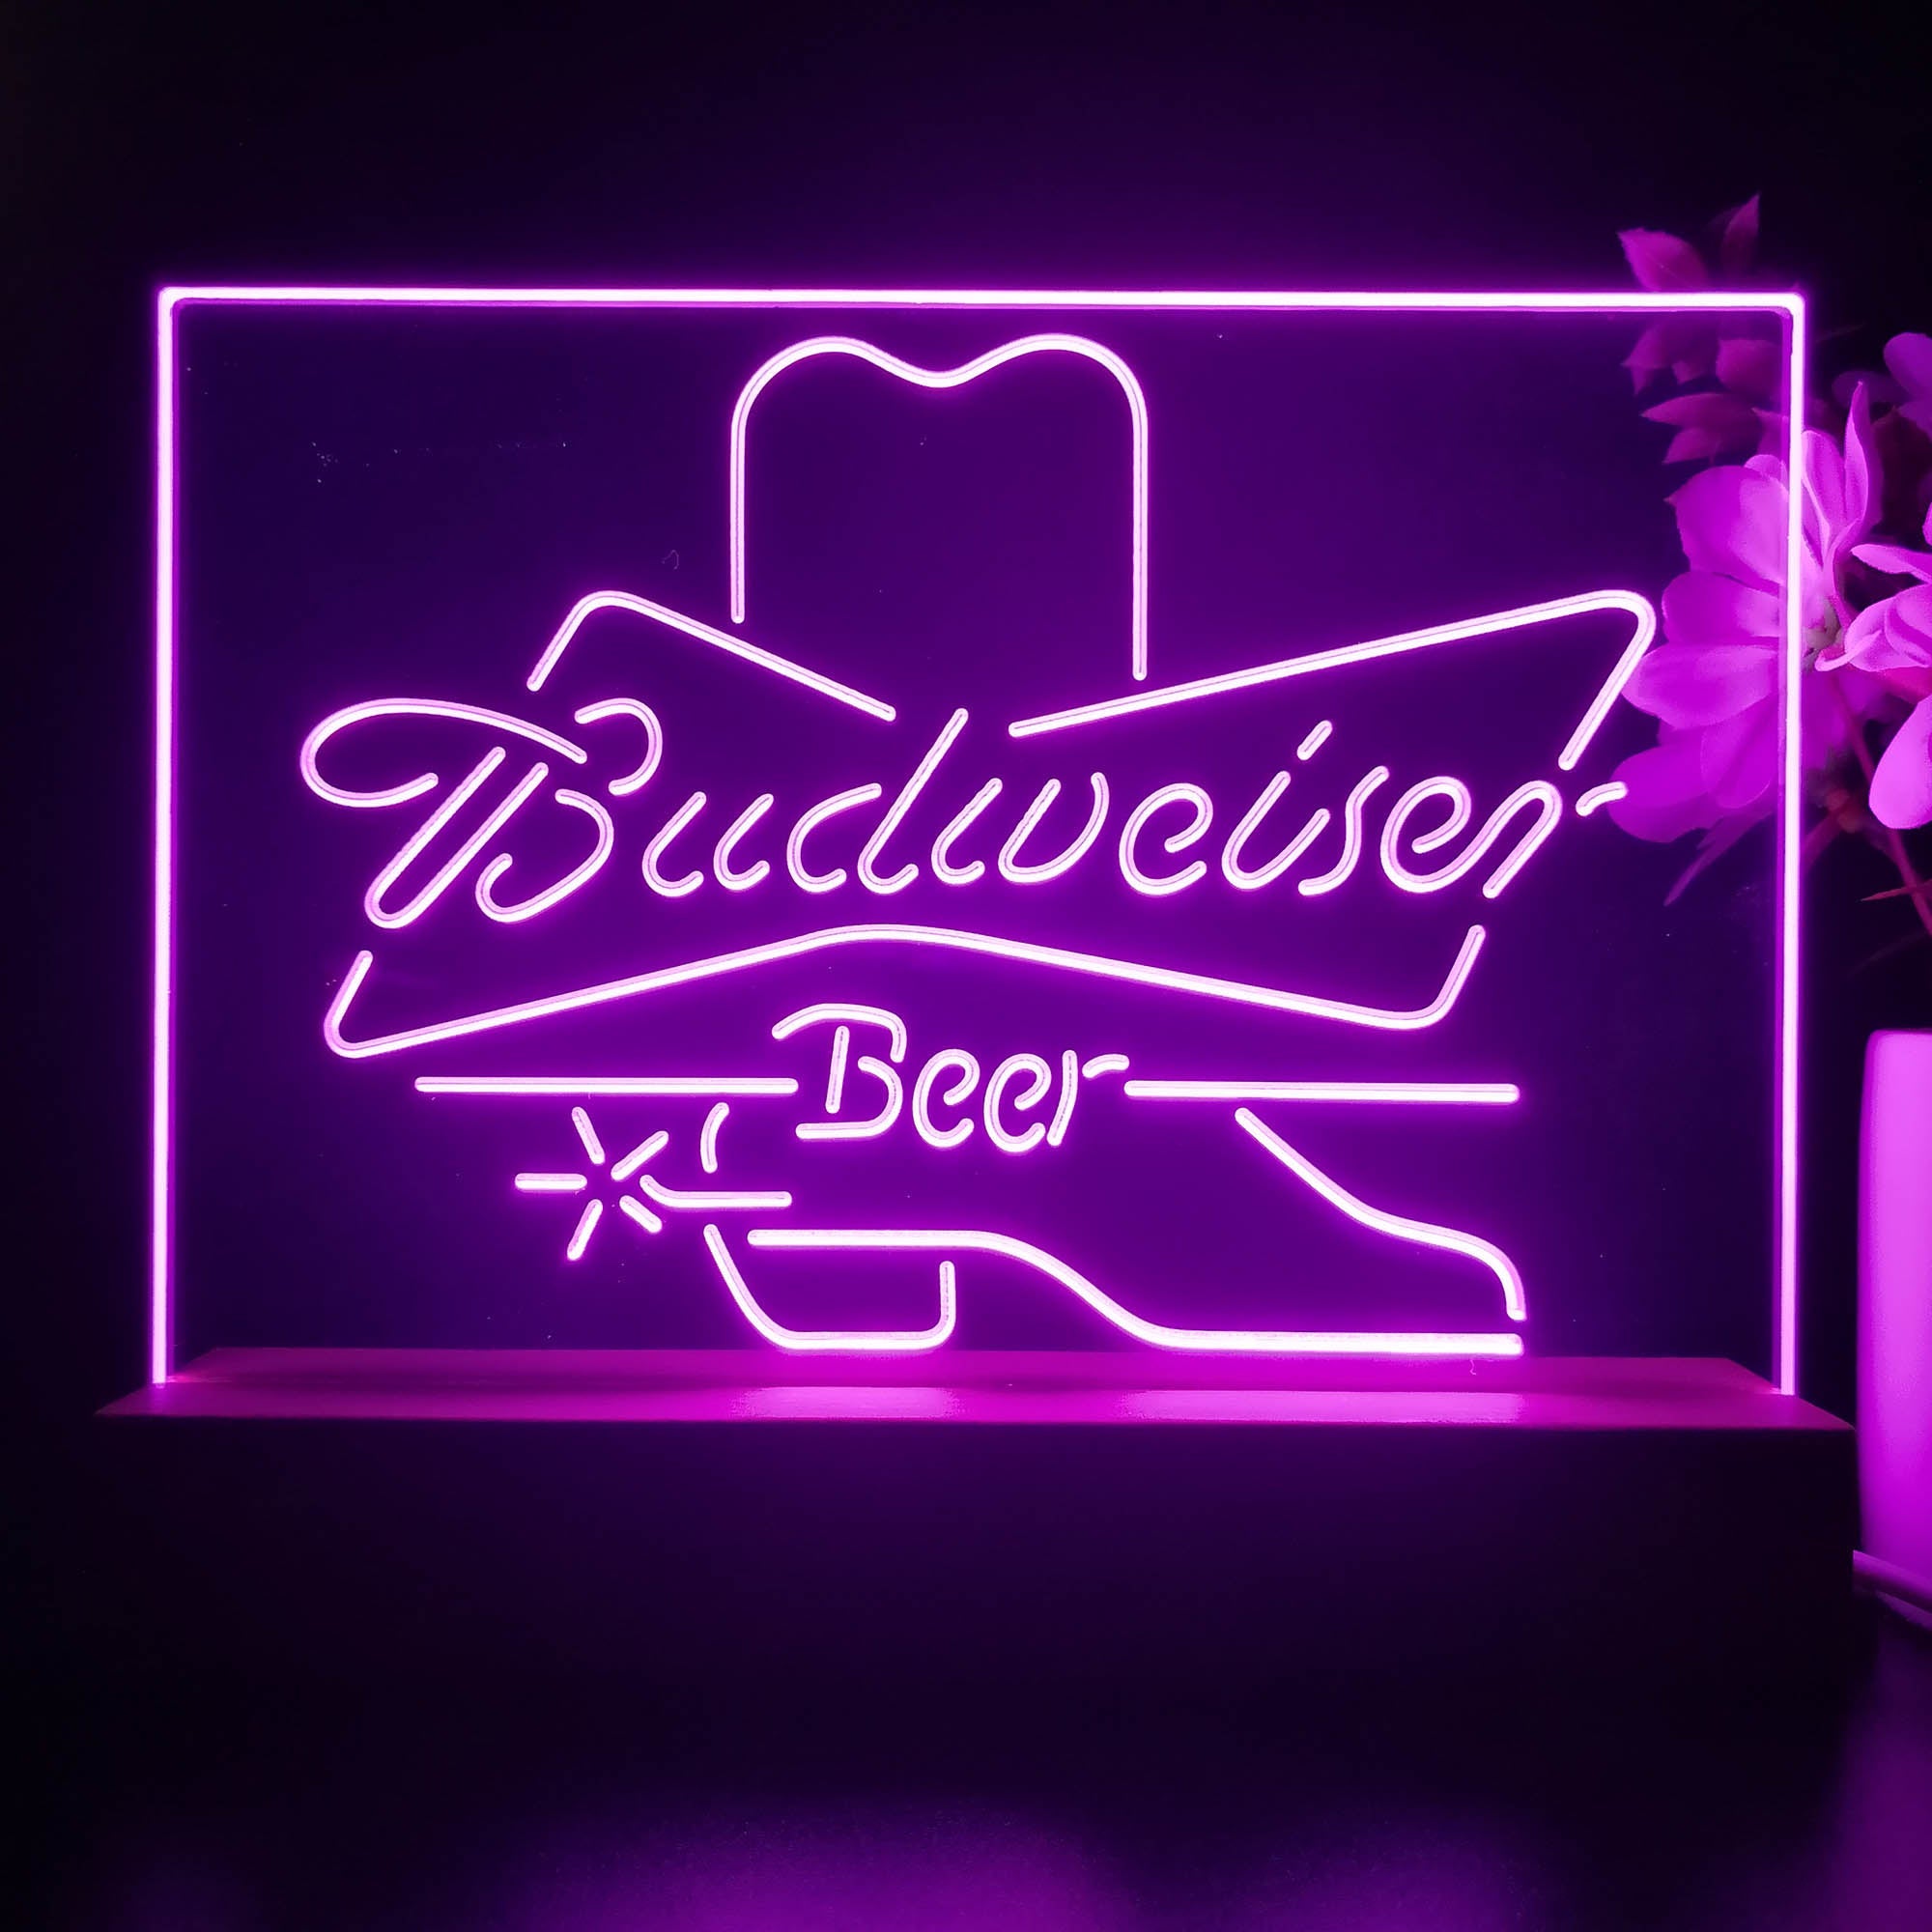 Budweisers Cowboys Boot Home Beer Bar Decoration Gifts Neon Sign Pub Bar Lamp